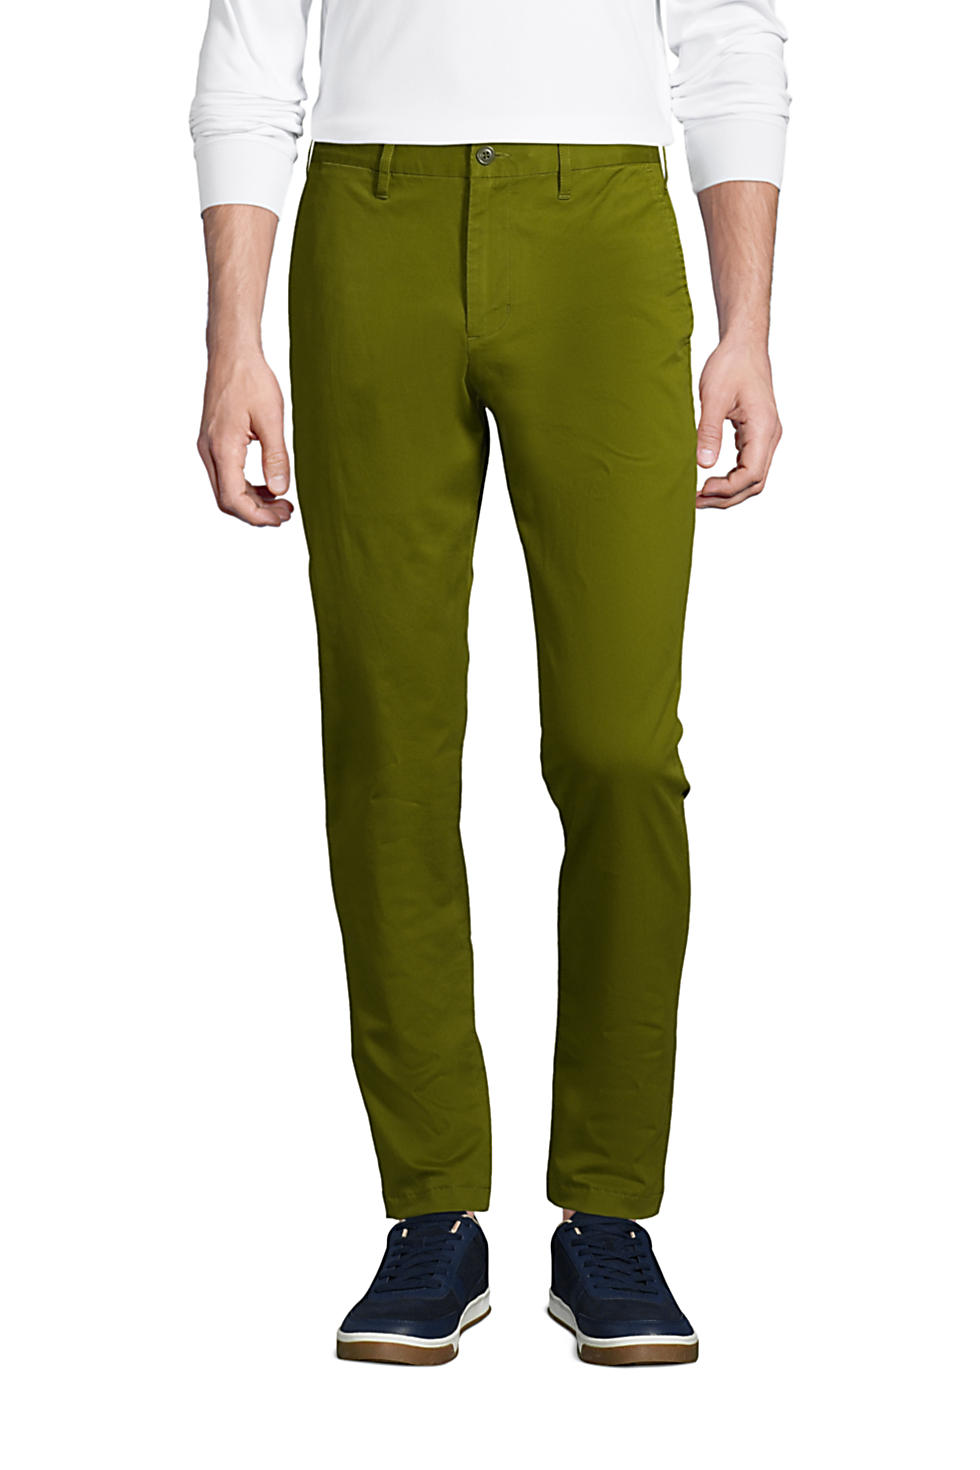 Lands' End Men's Athletic Fit Comfort-First Knockabout Chino Pants